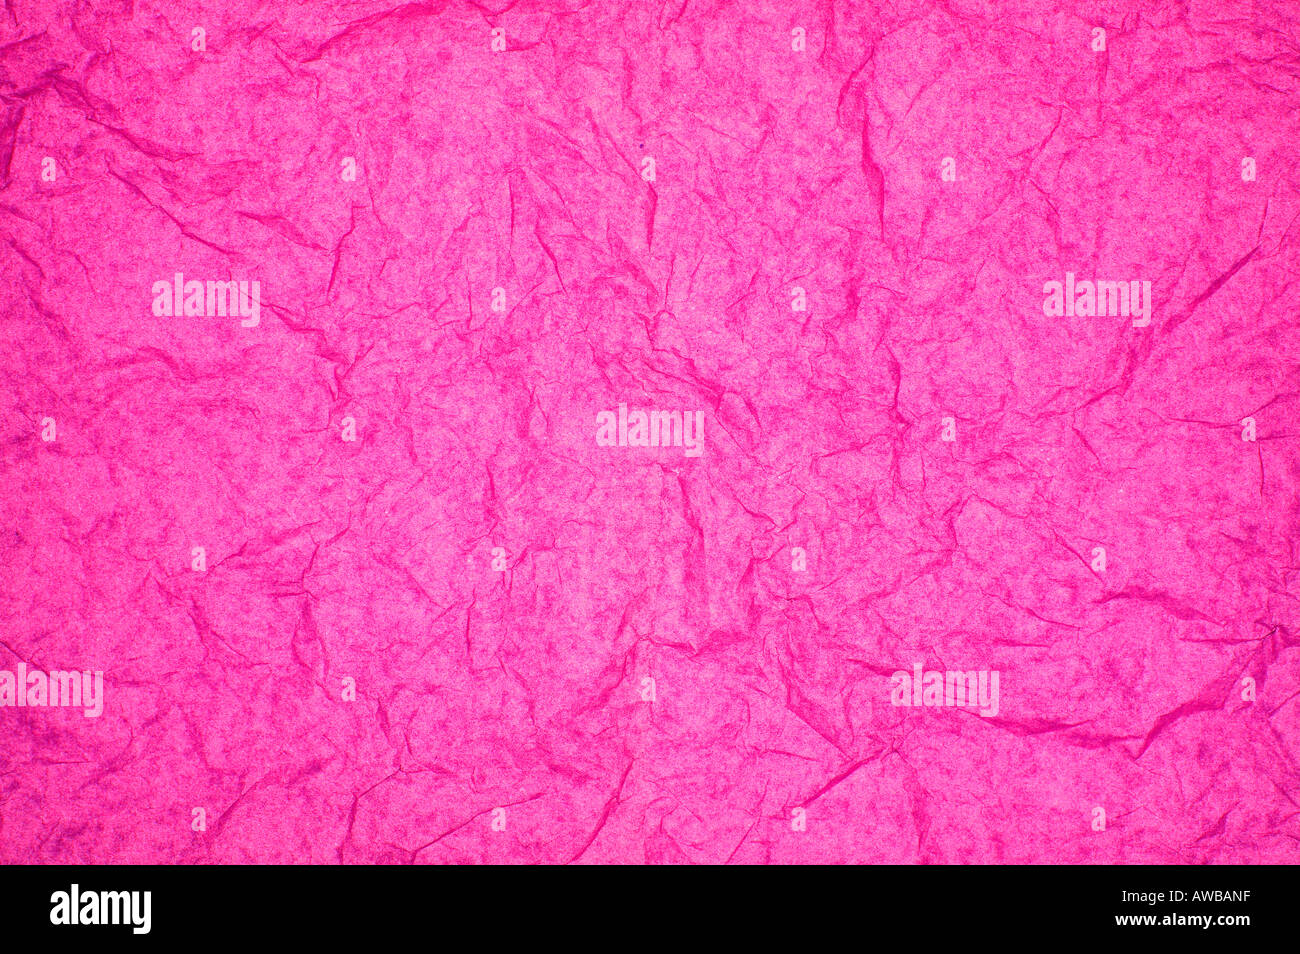 ABSTRACT RANDOM BACKGROUND OF CREASED CRUMPLED BRIGHT PINK TISSUE PAPER Stock Photo